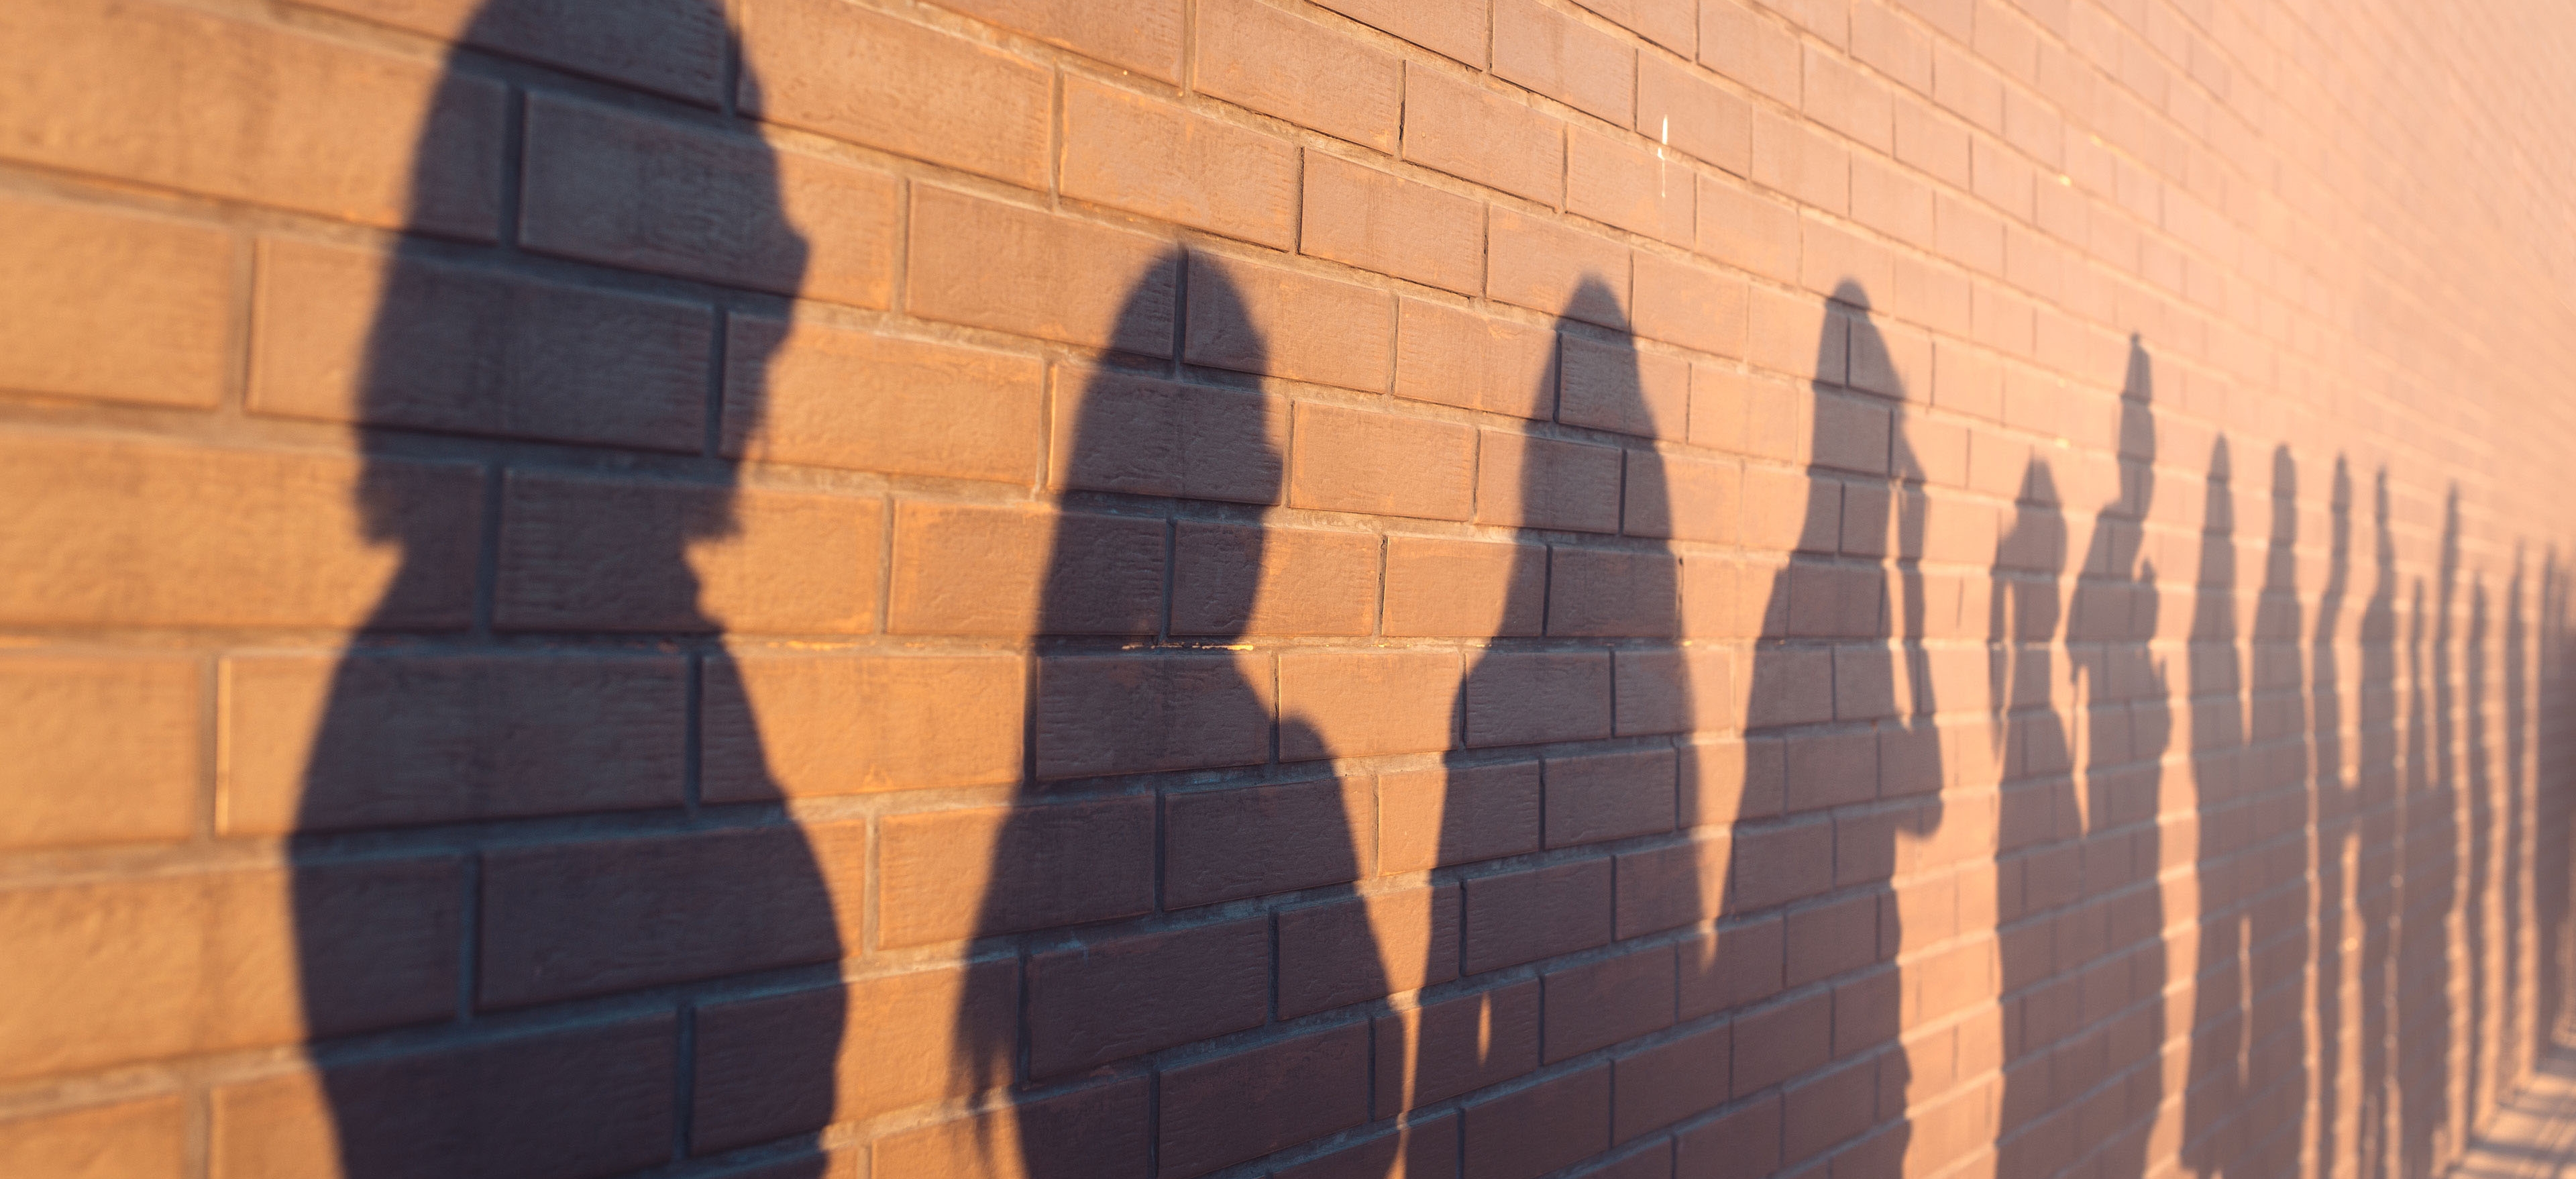 Line of shadows of people lined up against a red brick wall.